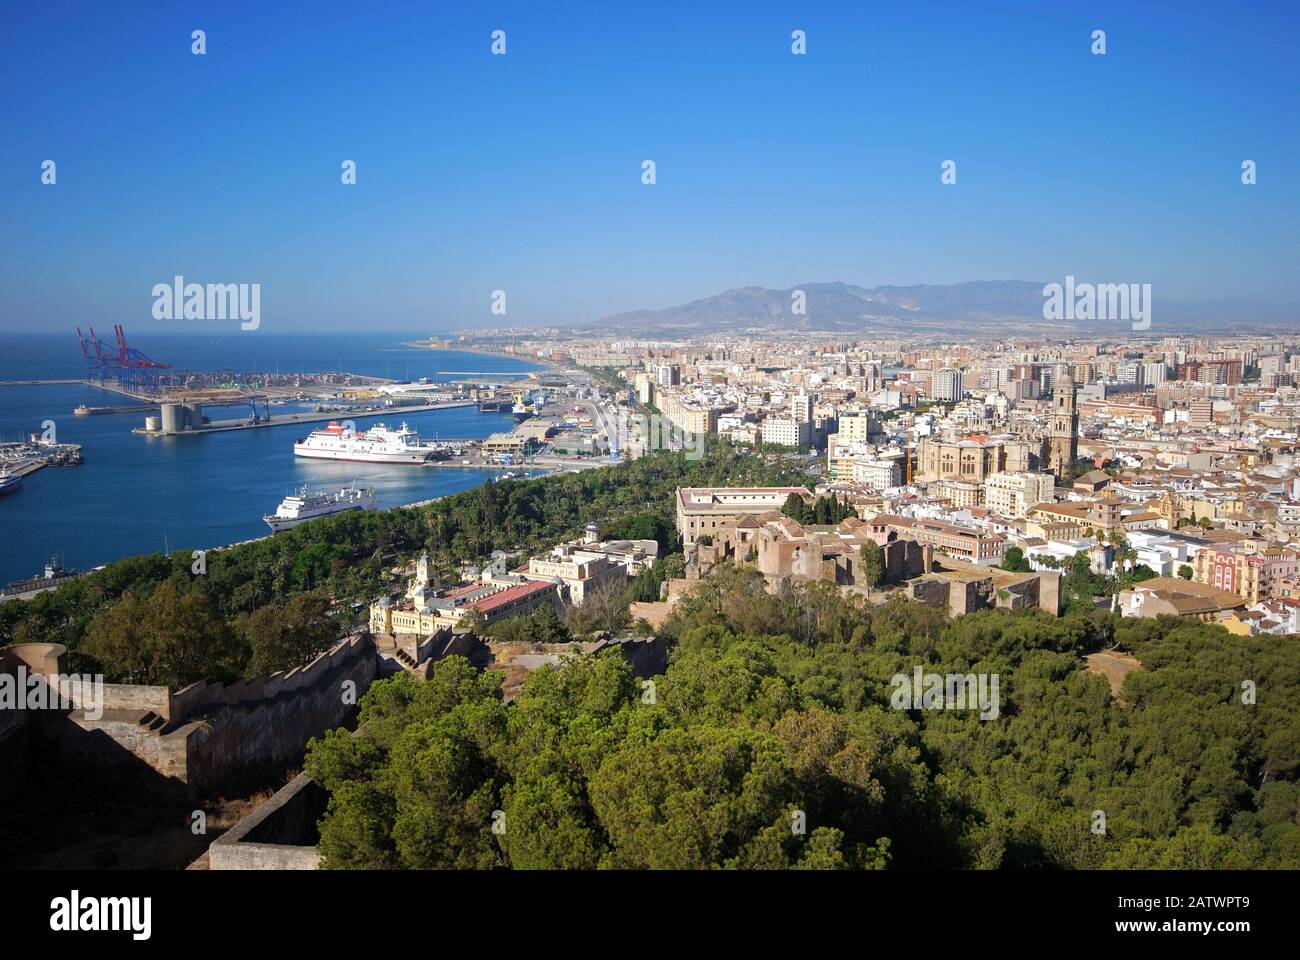 Elevated view of the harbour and city with the former city hall and parts of the castle in the foreground, Malaga, Spain. Stock Photo